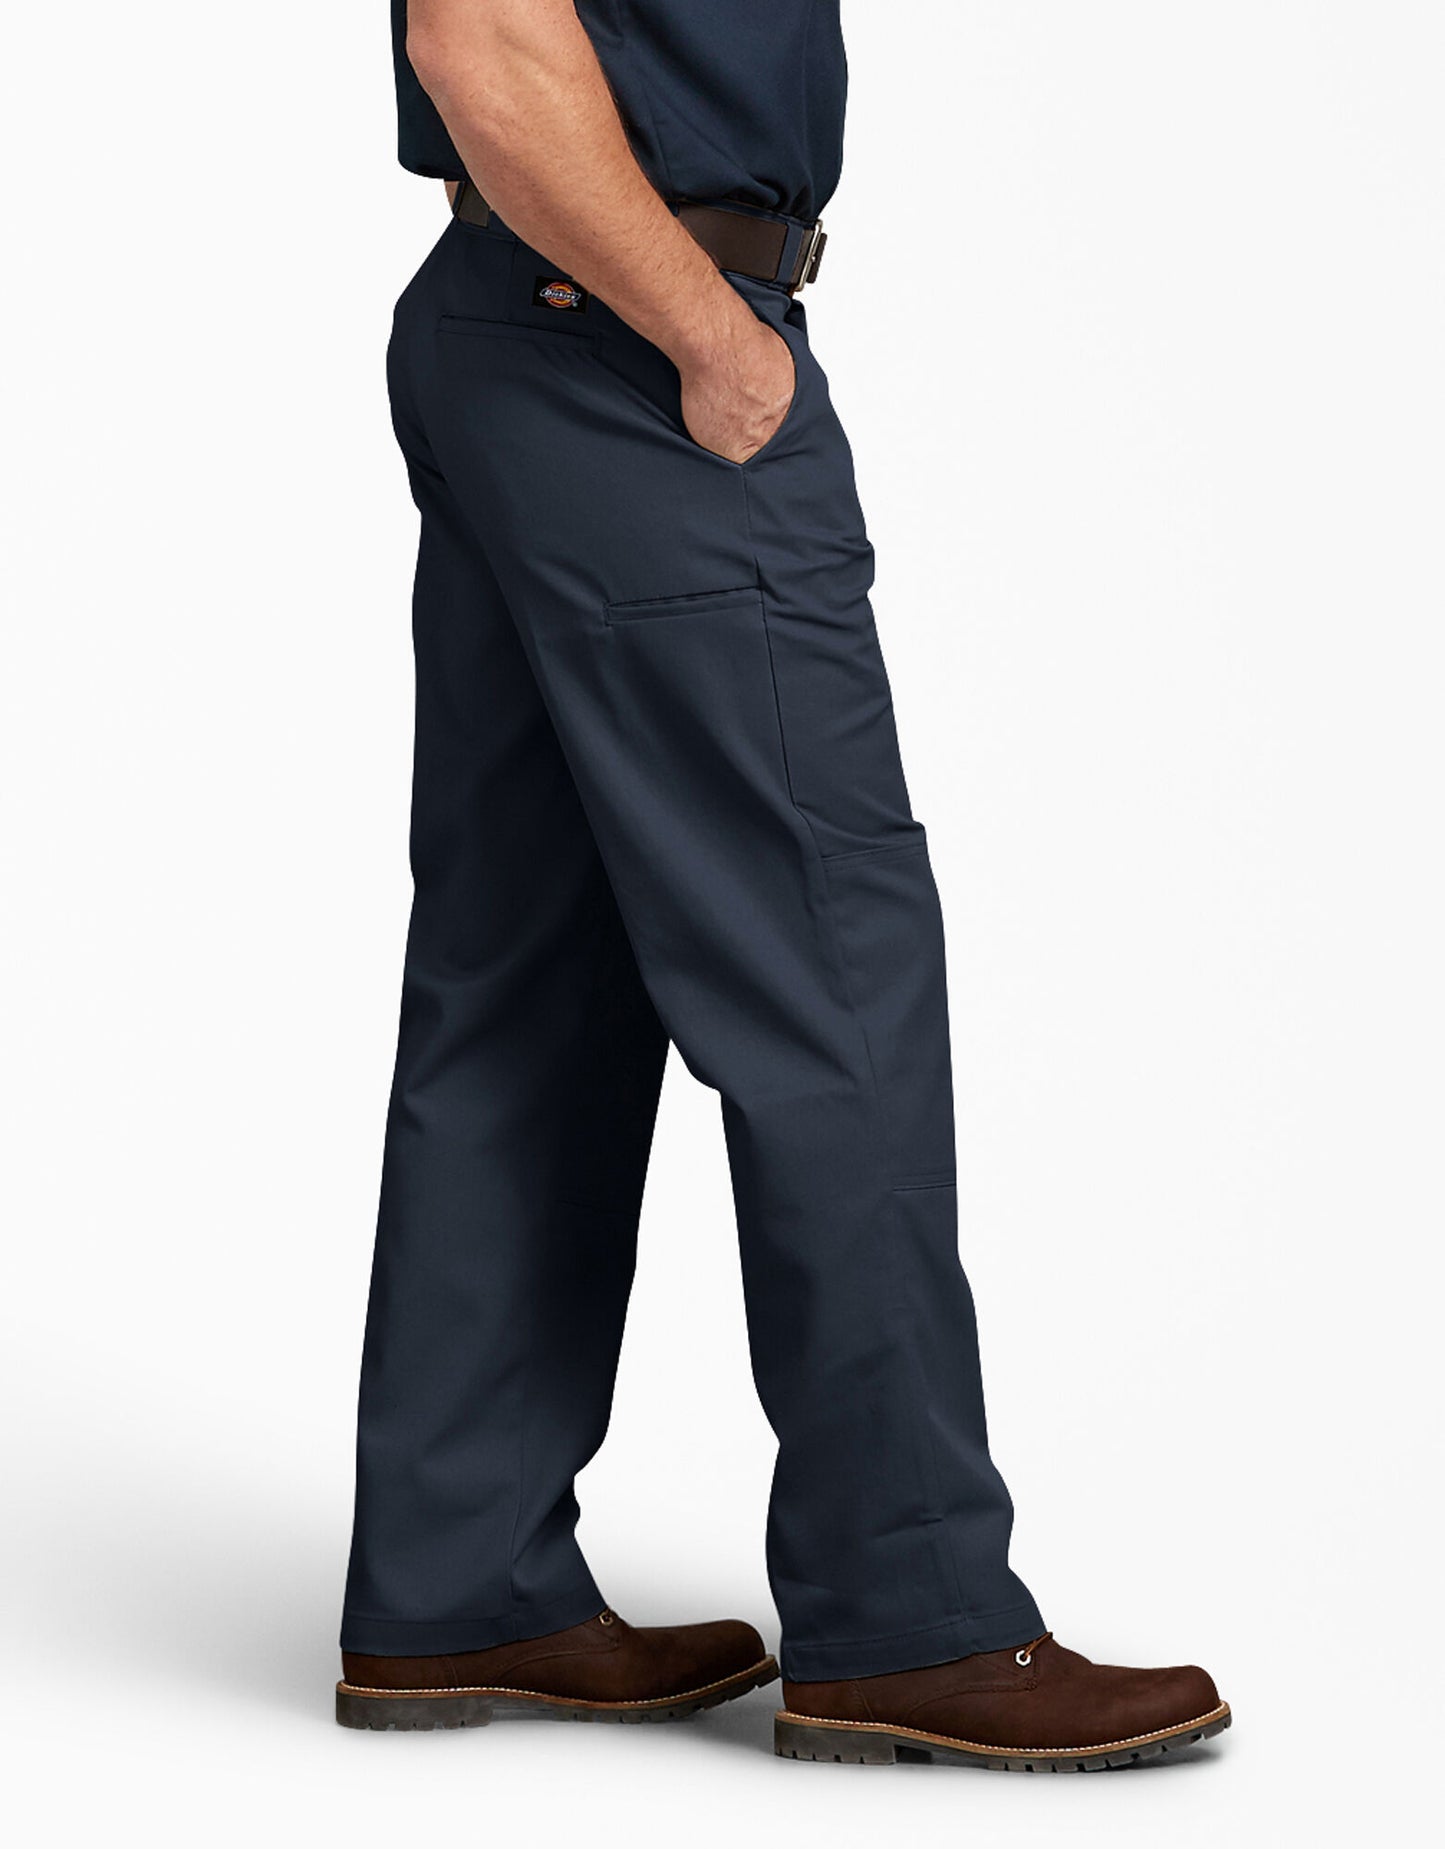 FLEX Relaxed Fit Straight Leg Double Knee Work Pants